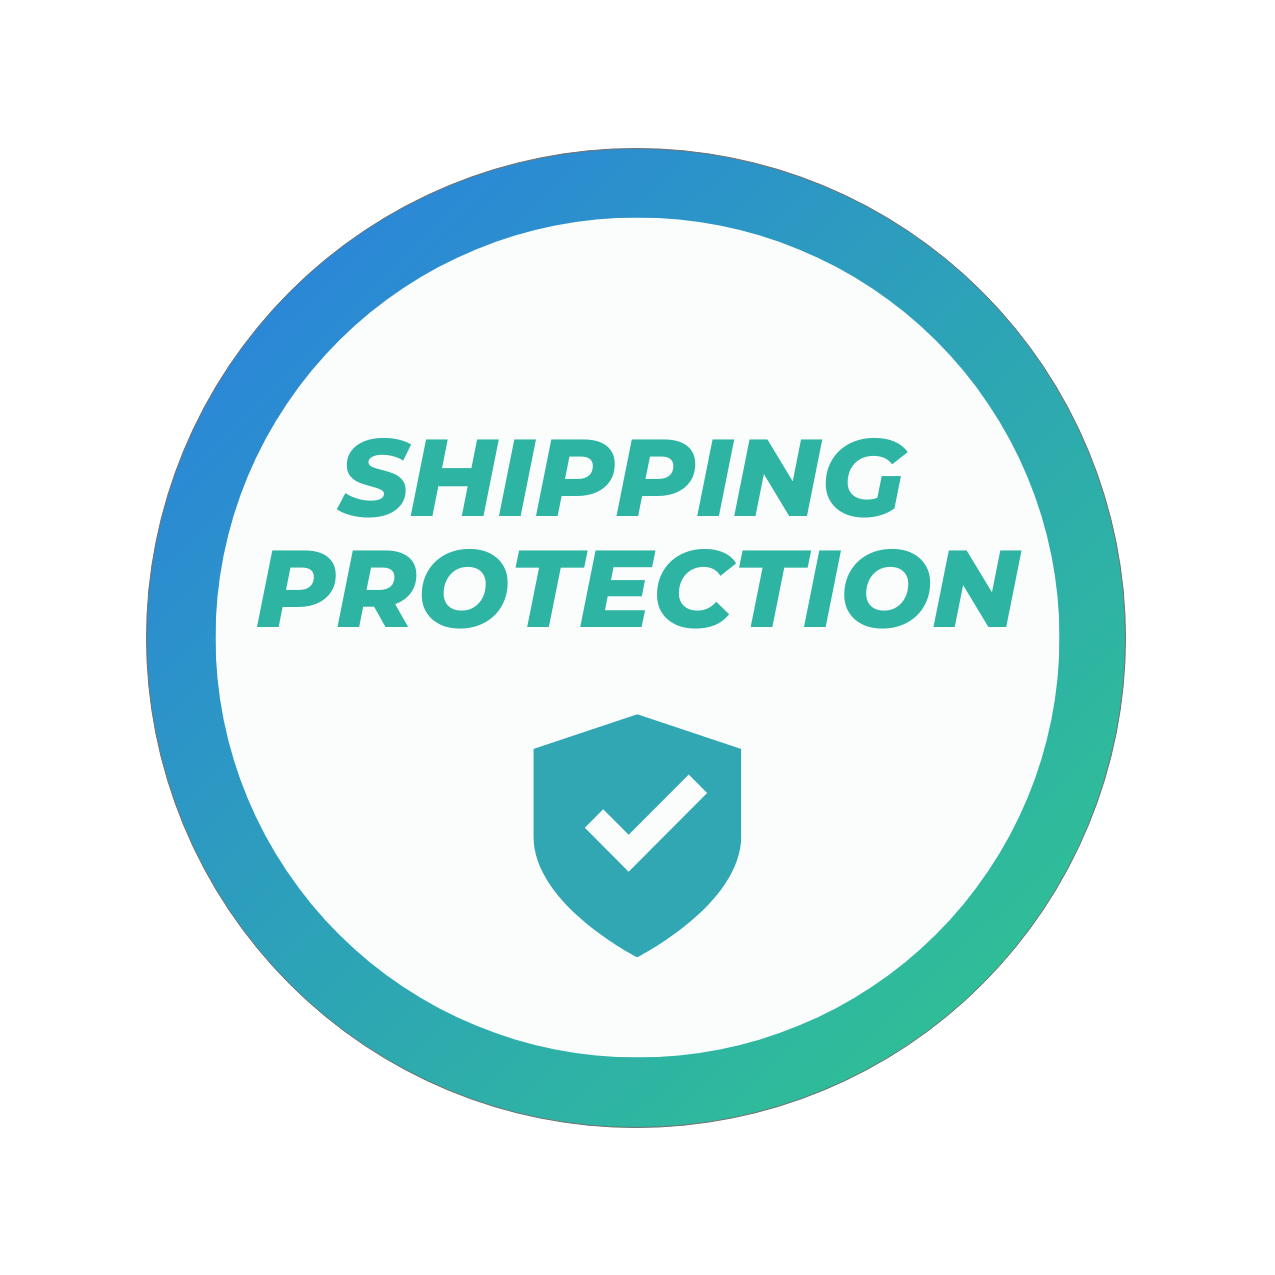 SHIPPING PROTECTION